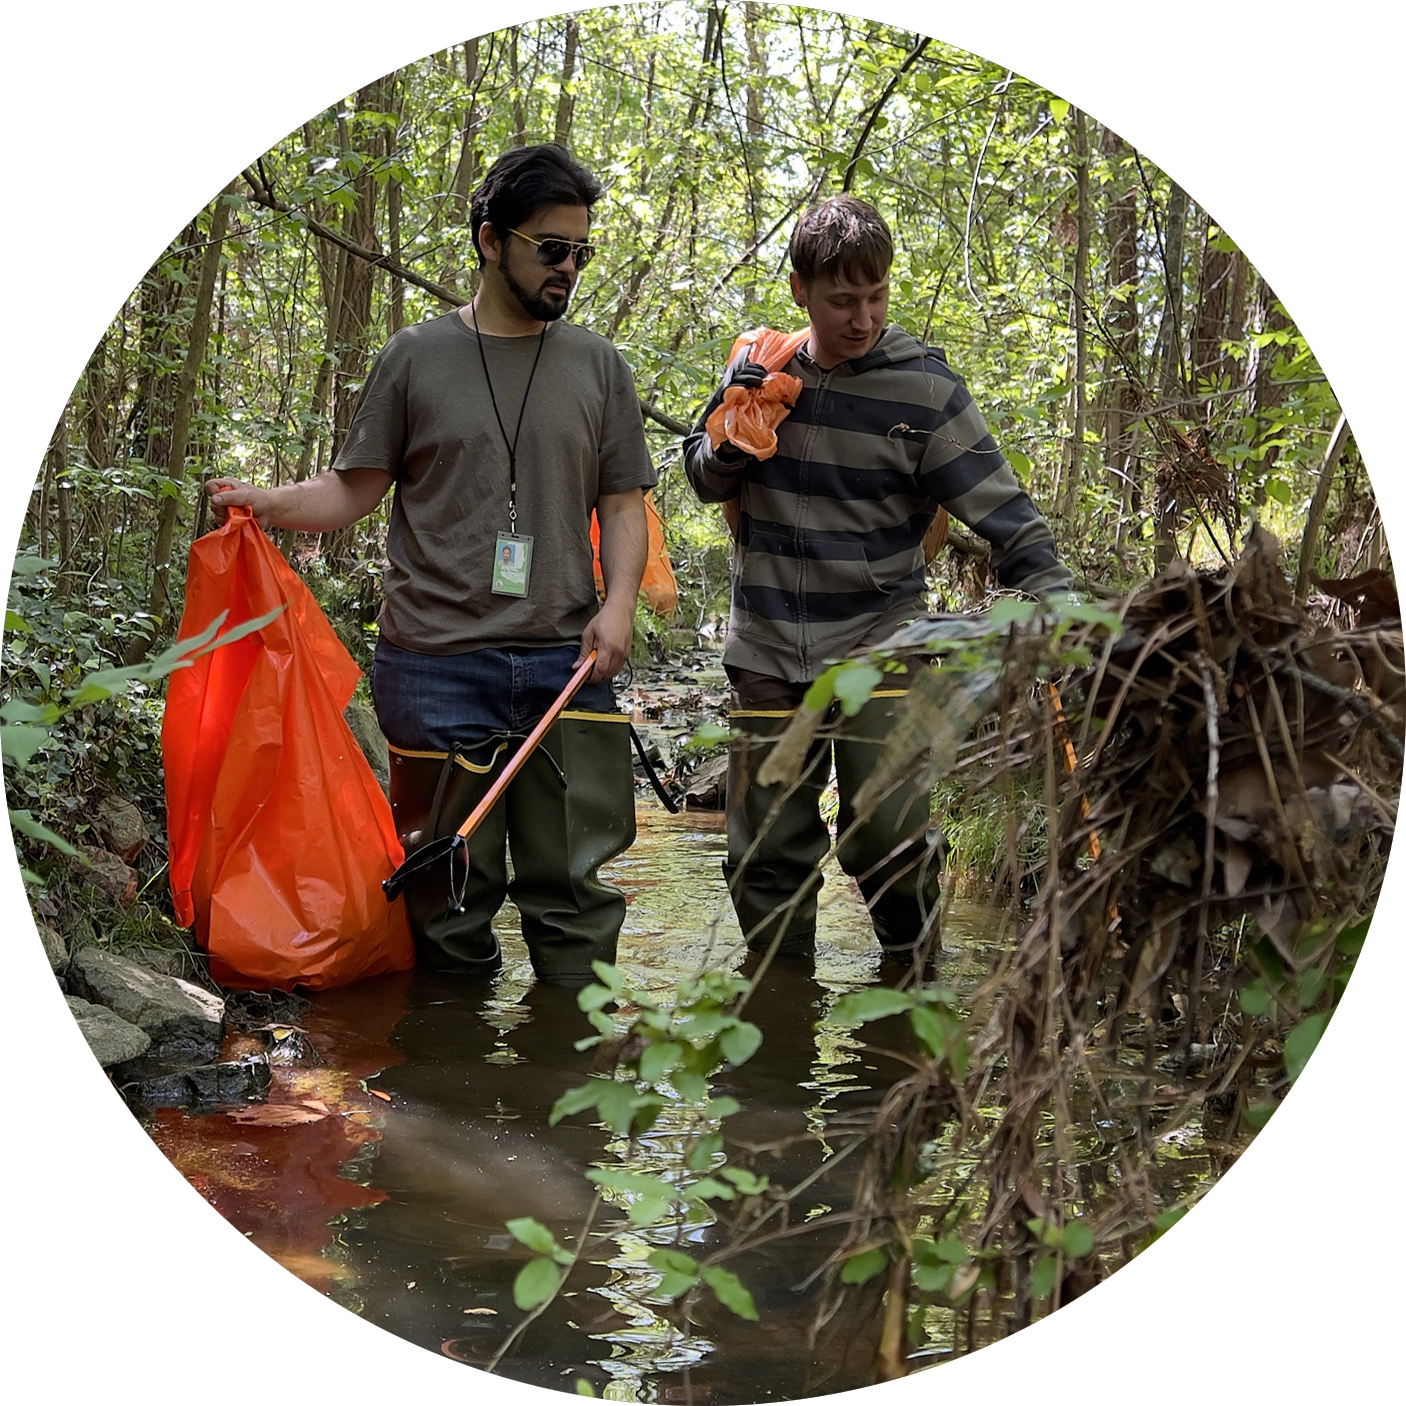 HEART water resources circle photo of 2 men wearing knee high rubber boots walking in a stream each one holding an orange trash collection bag & tool for picking up trash